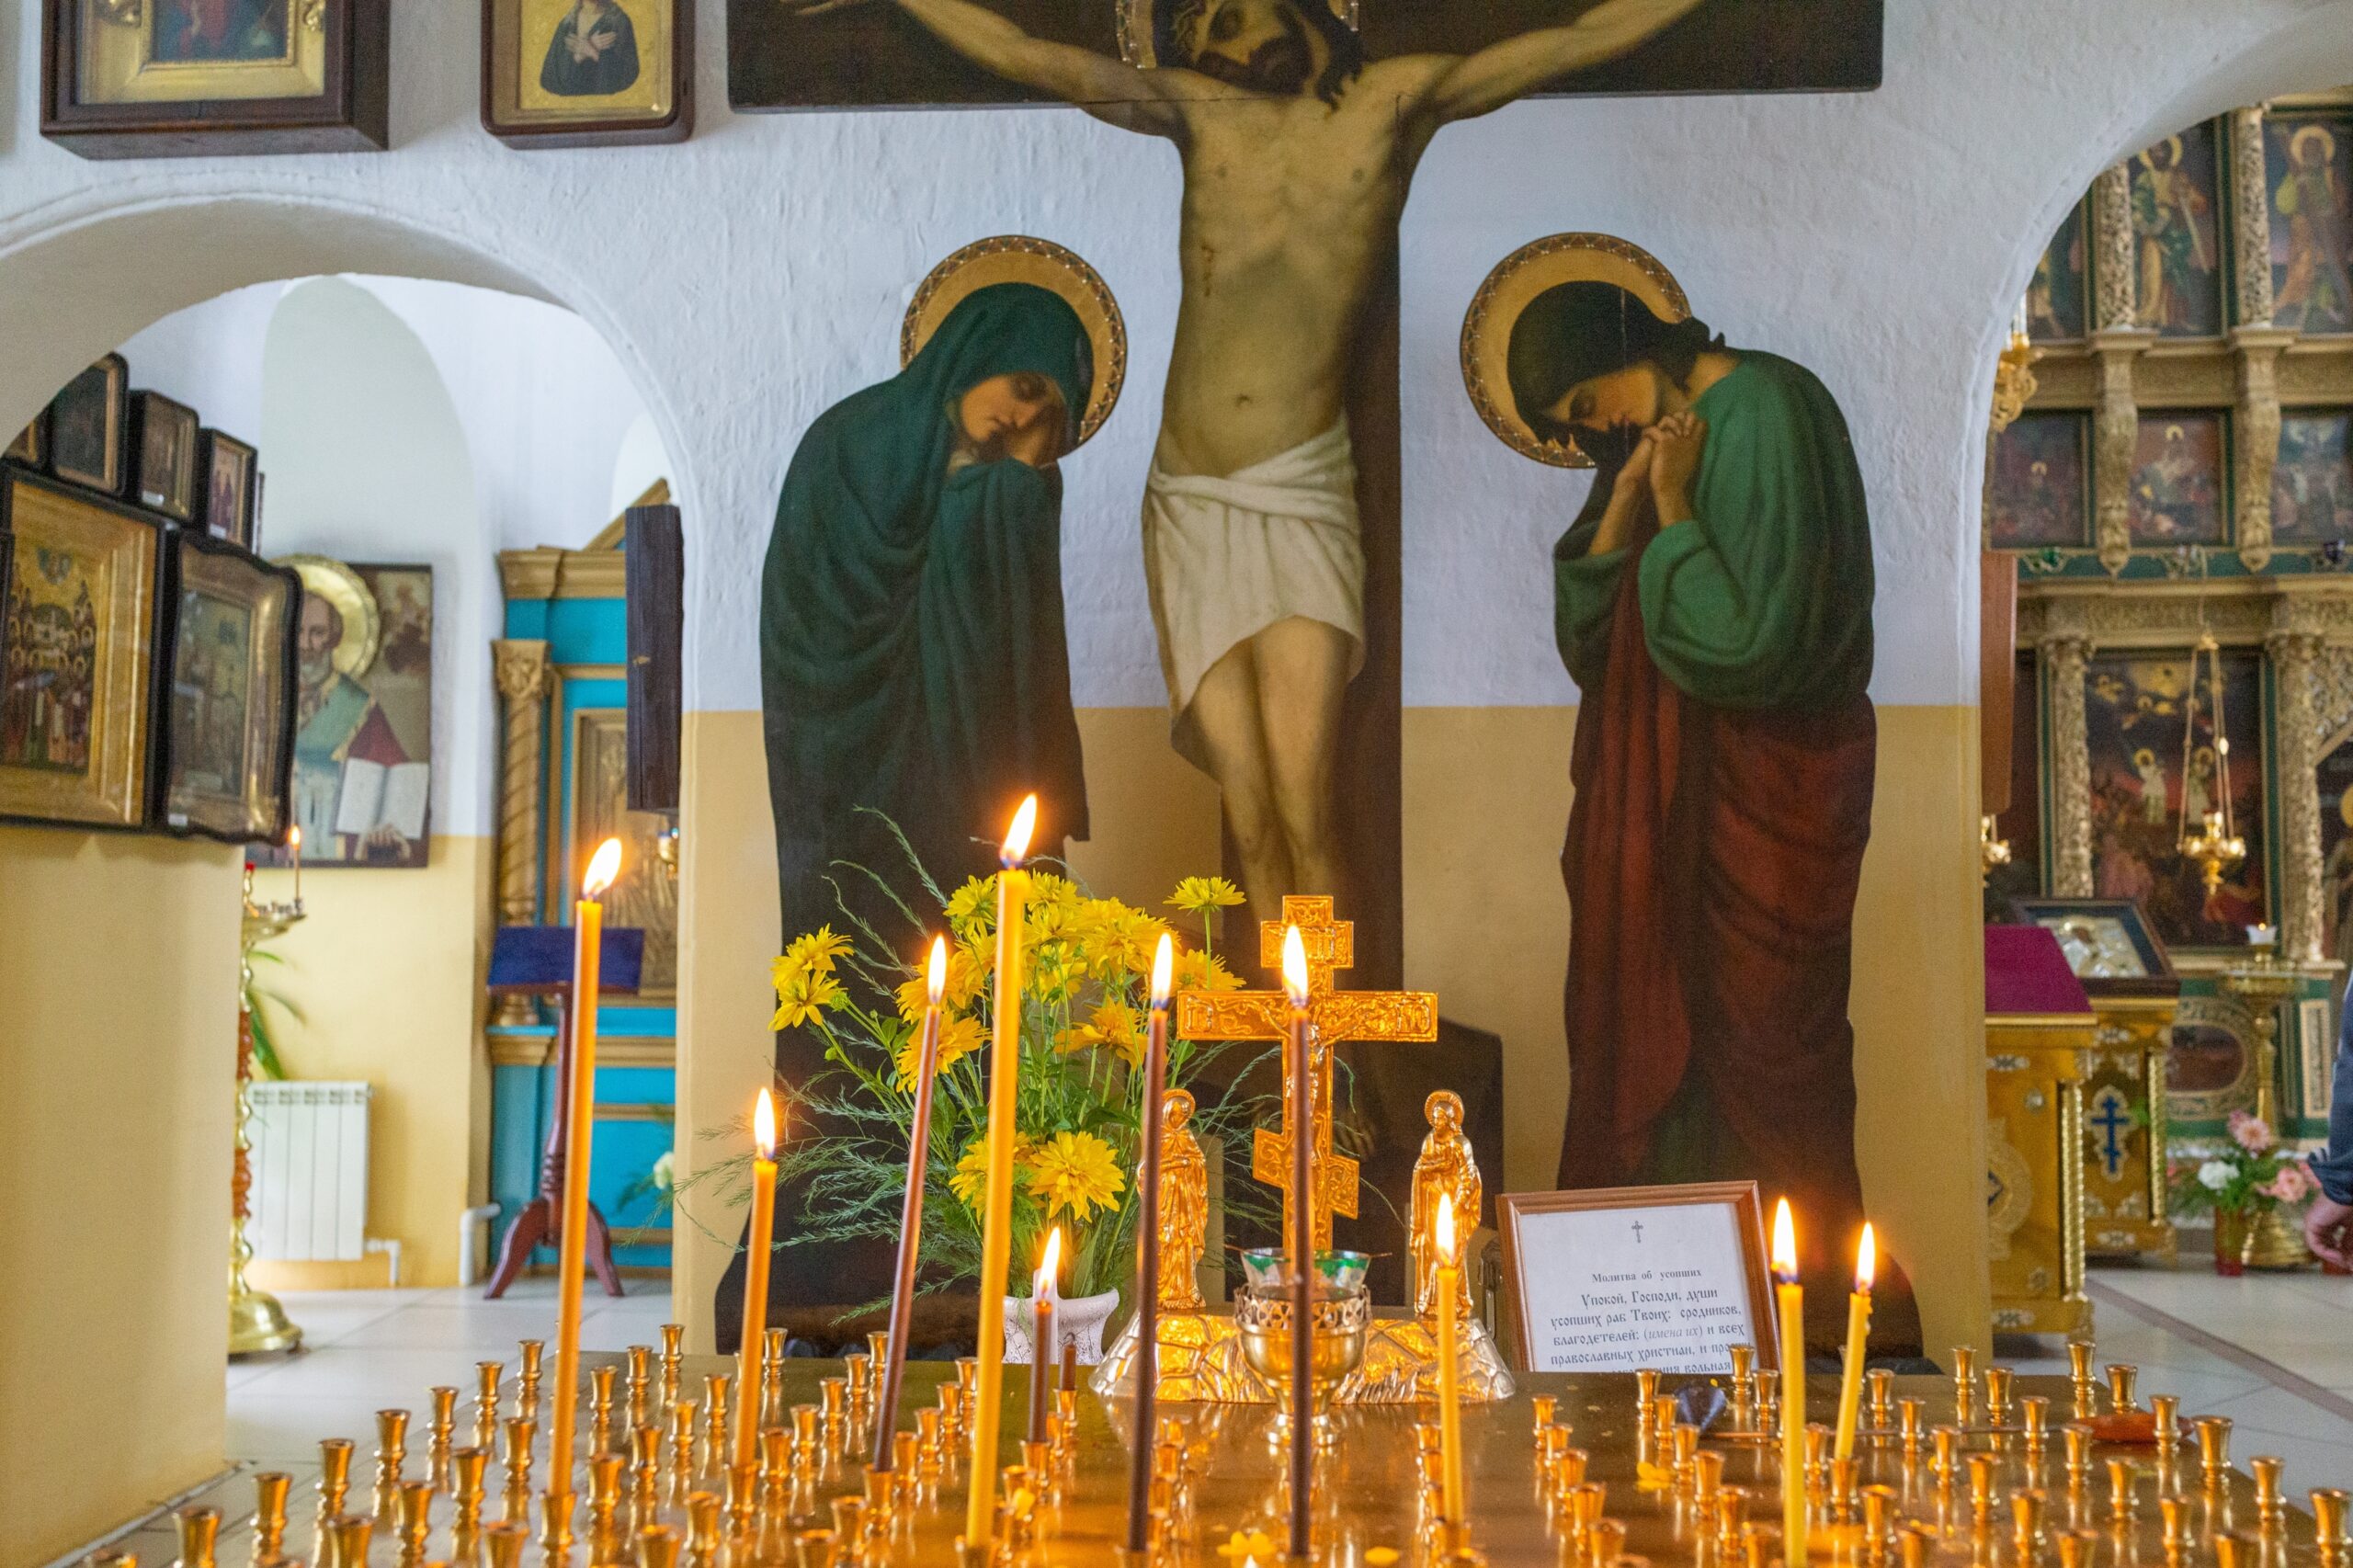 At the Foot of the Cross: Lessons From Ukraine, a Review